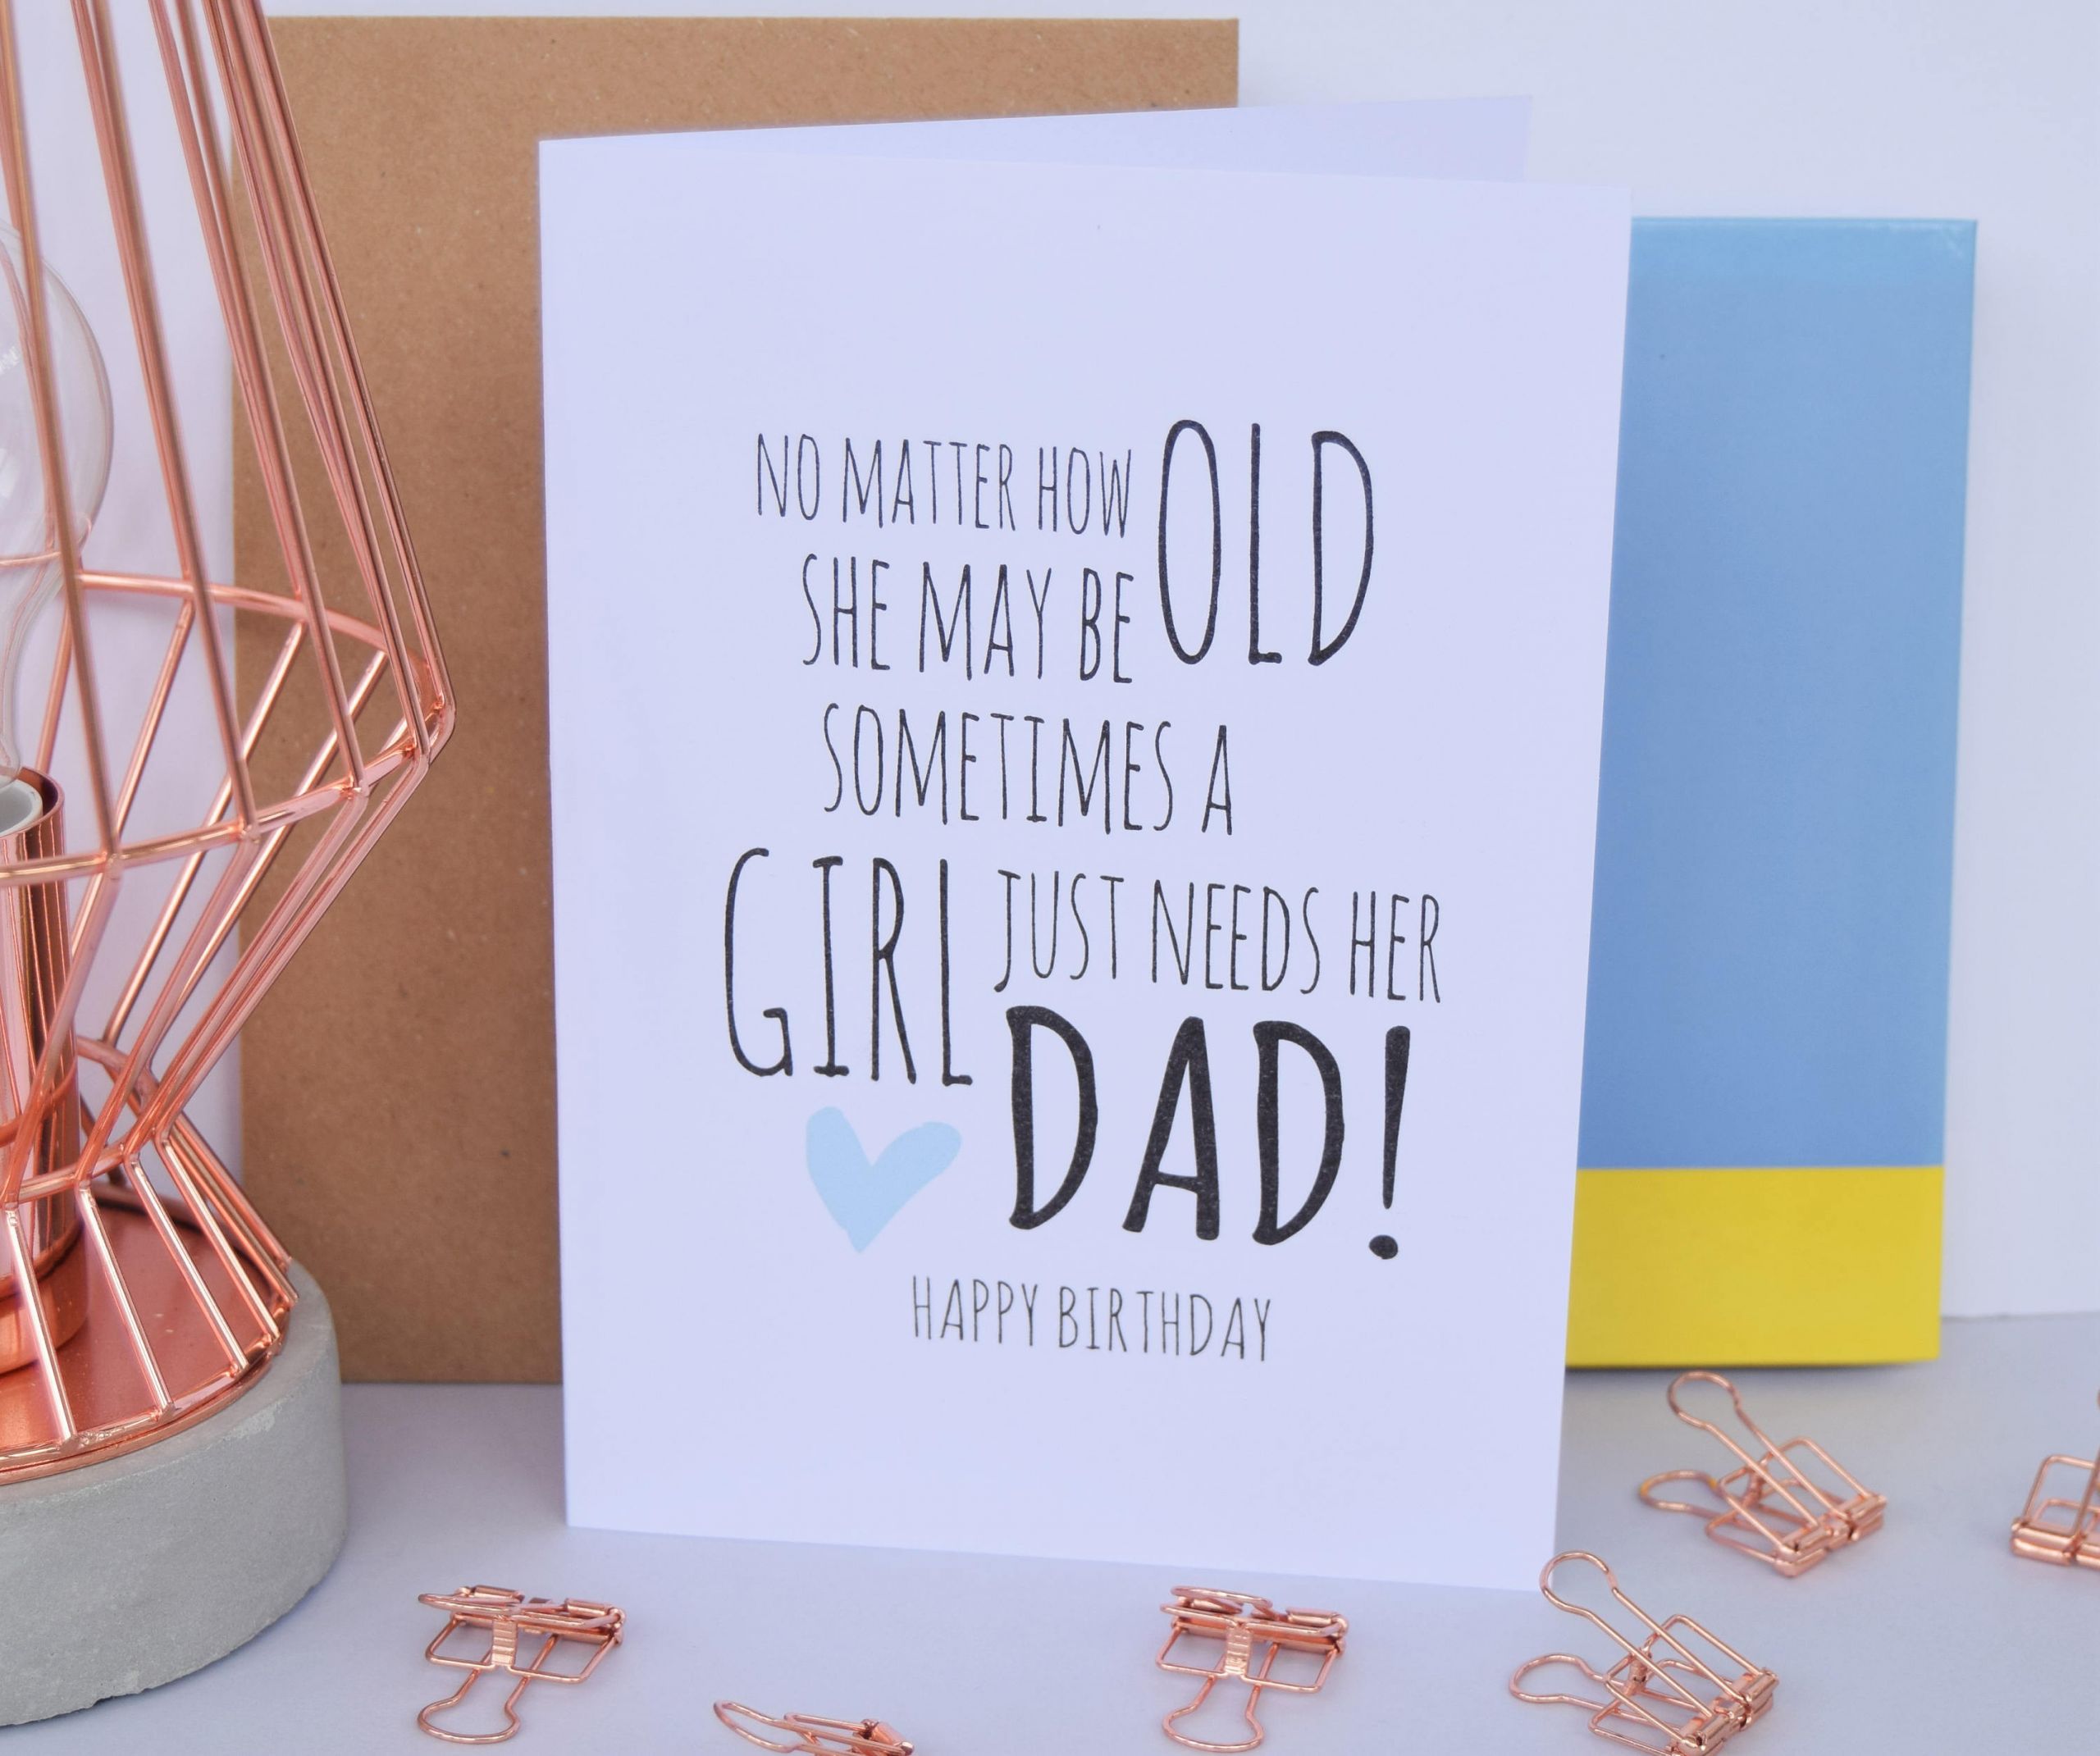 Birthday Cards For Dads
 Dad Birthday Card A Girl Just Needs Her Dad Daughter Dad